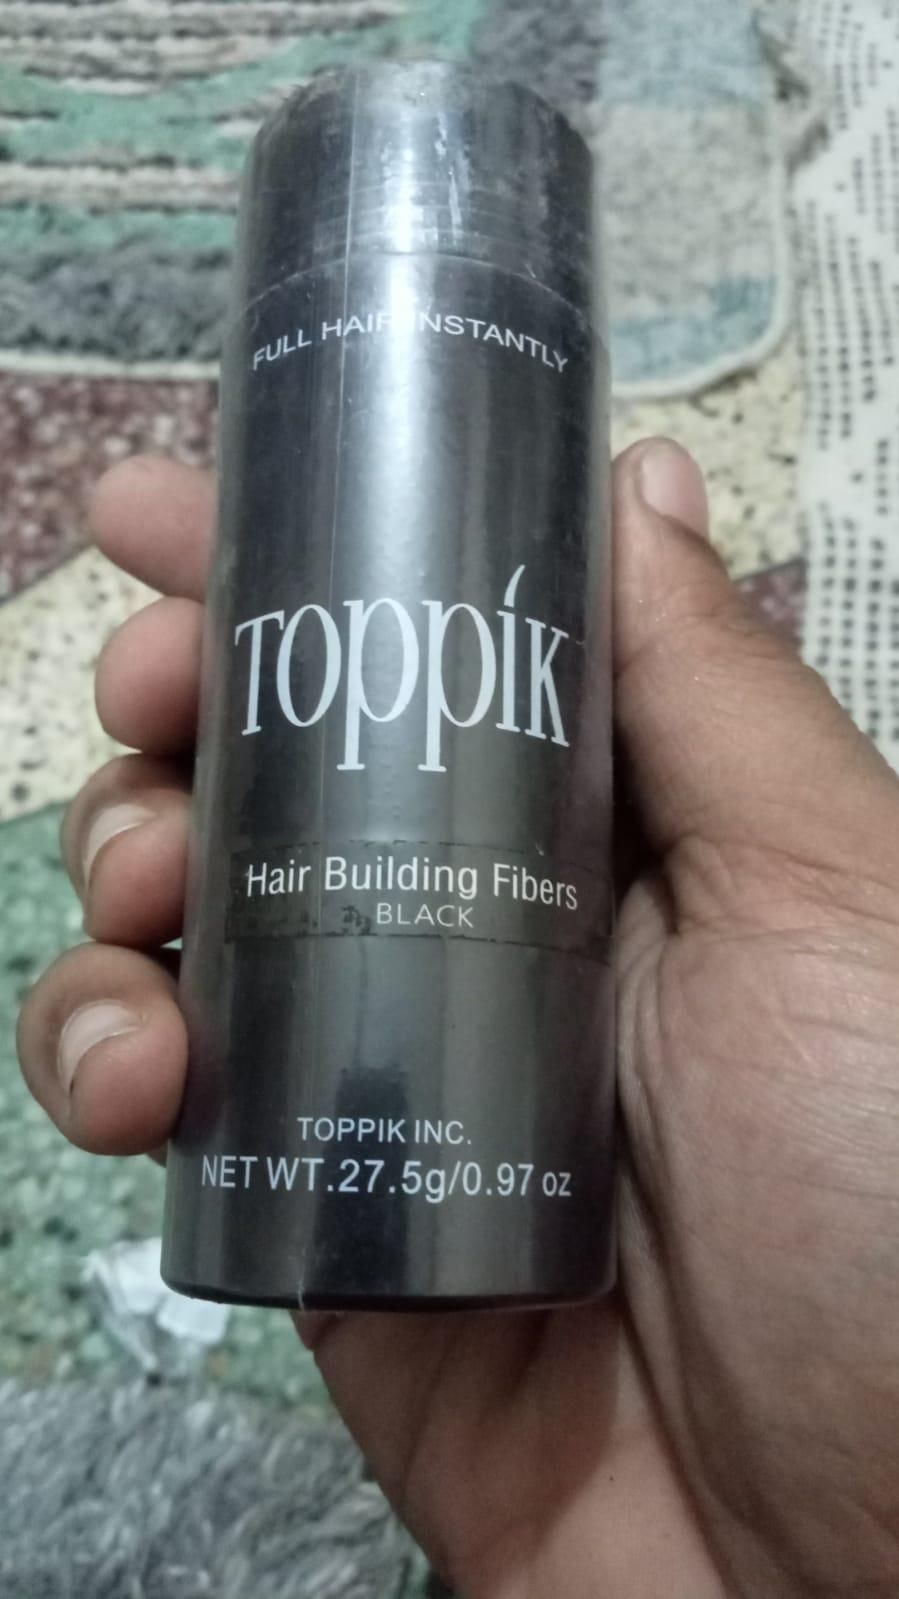 Toppik Hair Building Fibers, Keratin-Derived Fibres for Naturally Thicker Looking Hair, Cover bald spot - Black 27.5 gm with Spray Applicator, Combo Pack